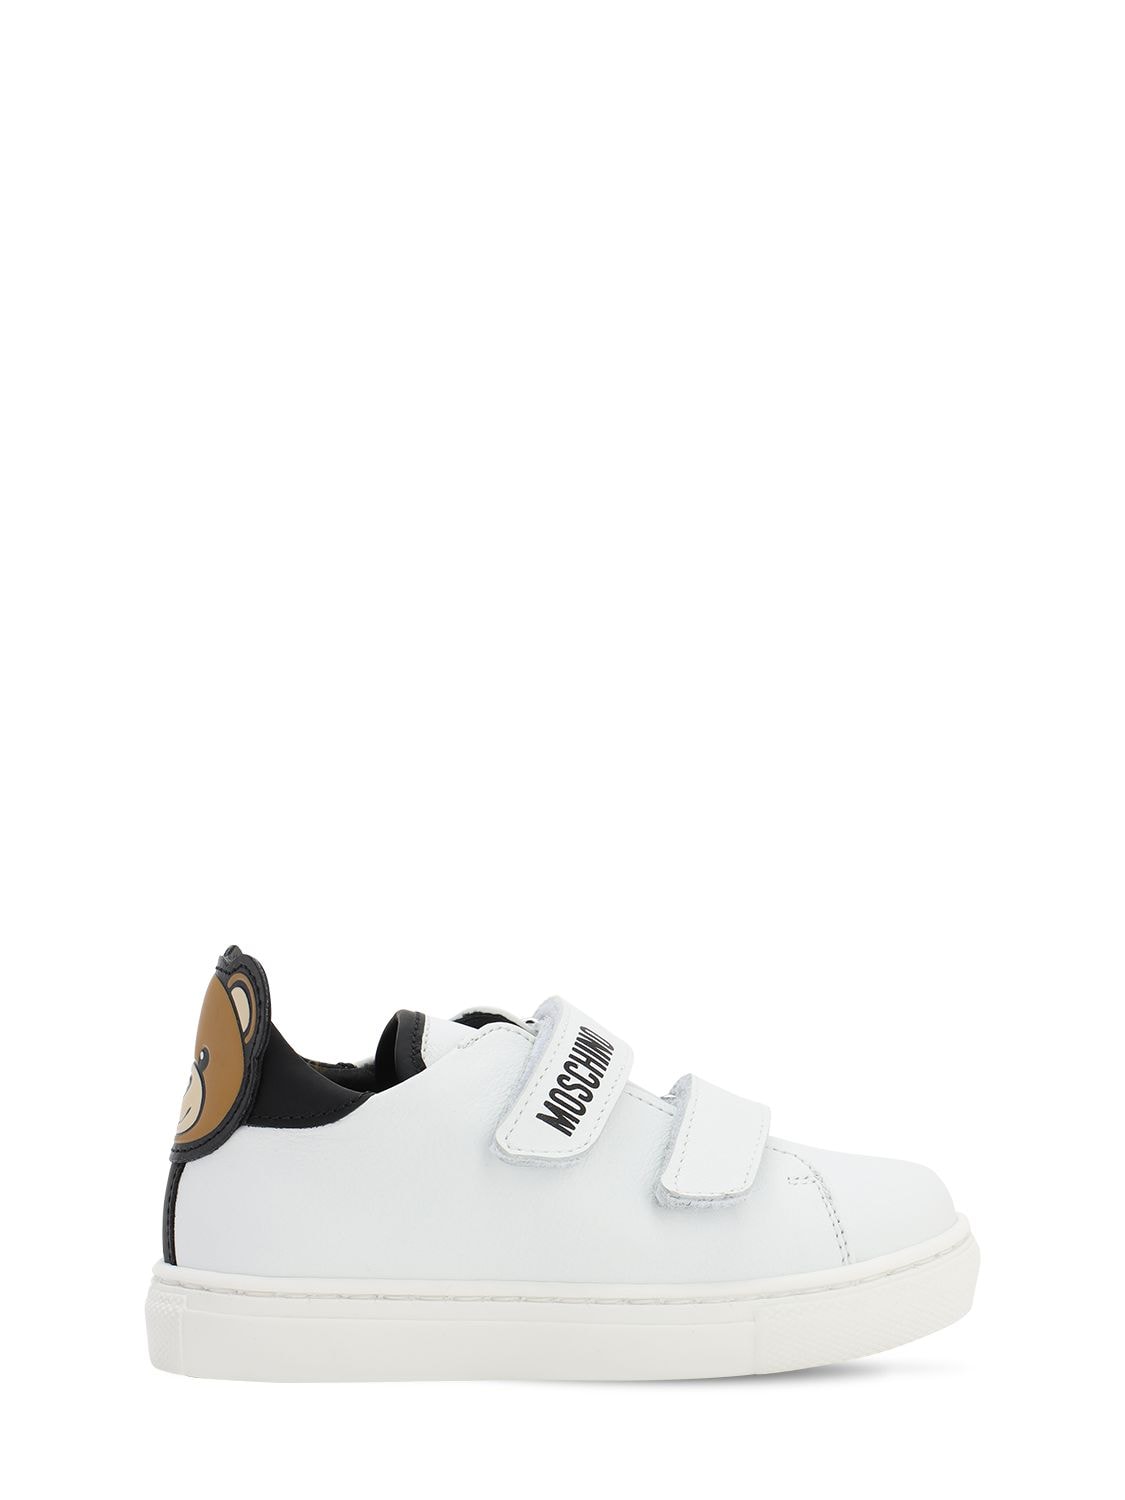 MOSCHINO LEATHER STRAP SNEAKERS W/ PATCH,71ILXF012-VKFSIDE1